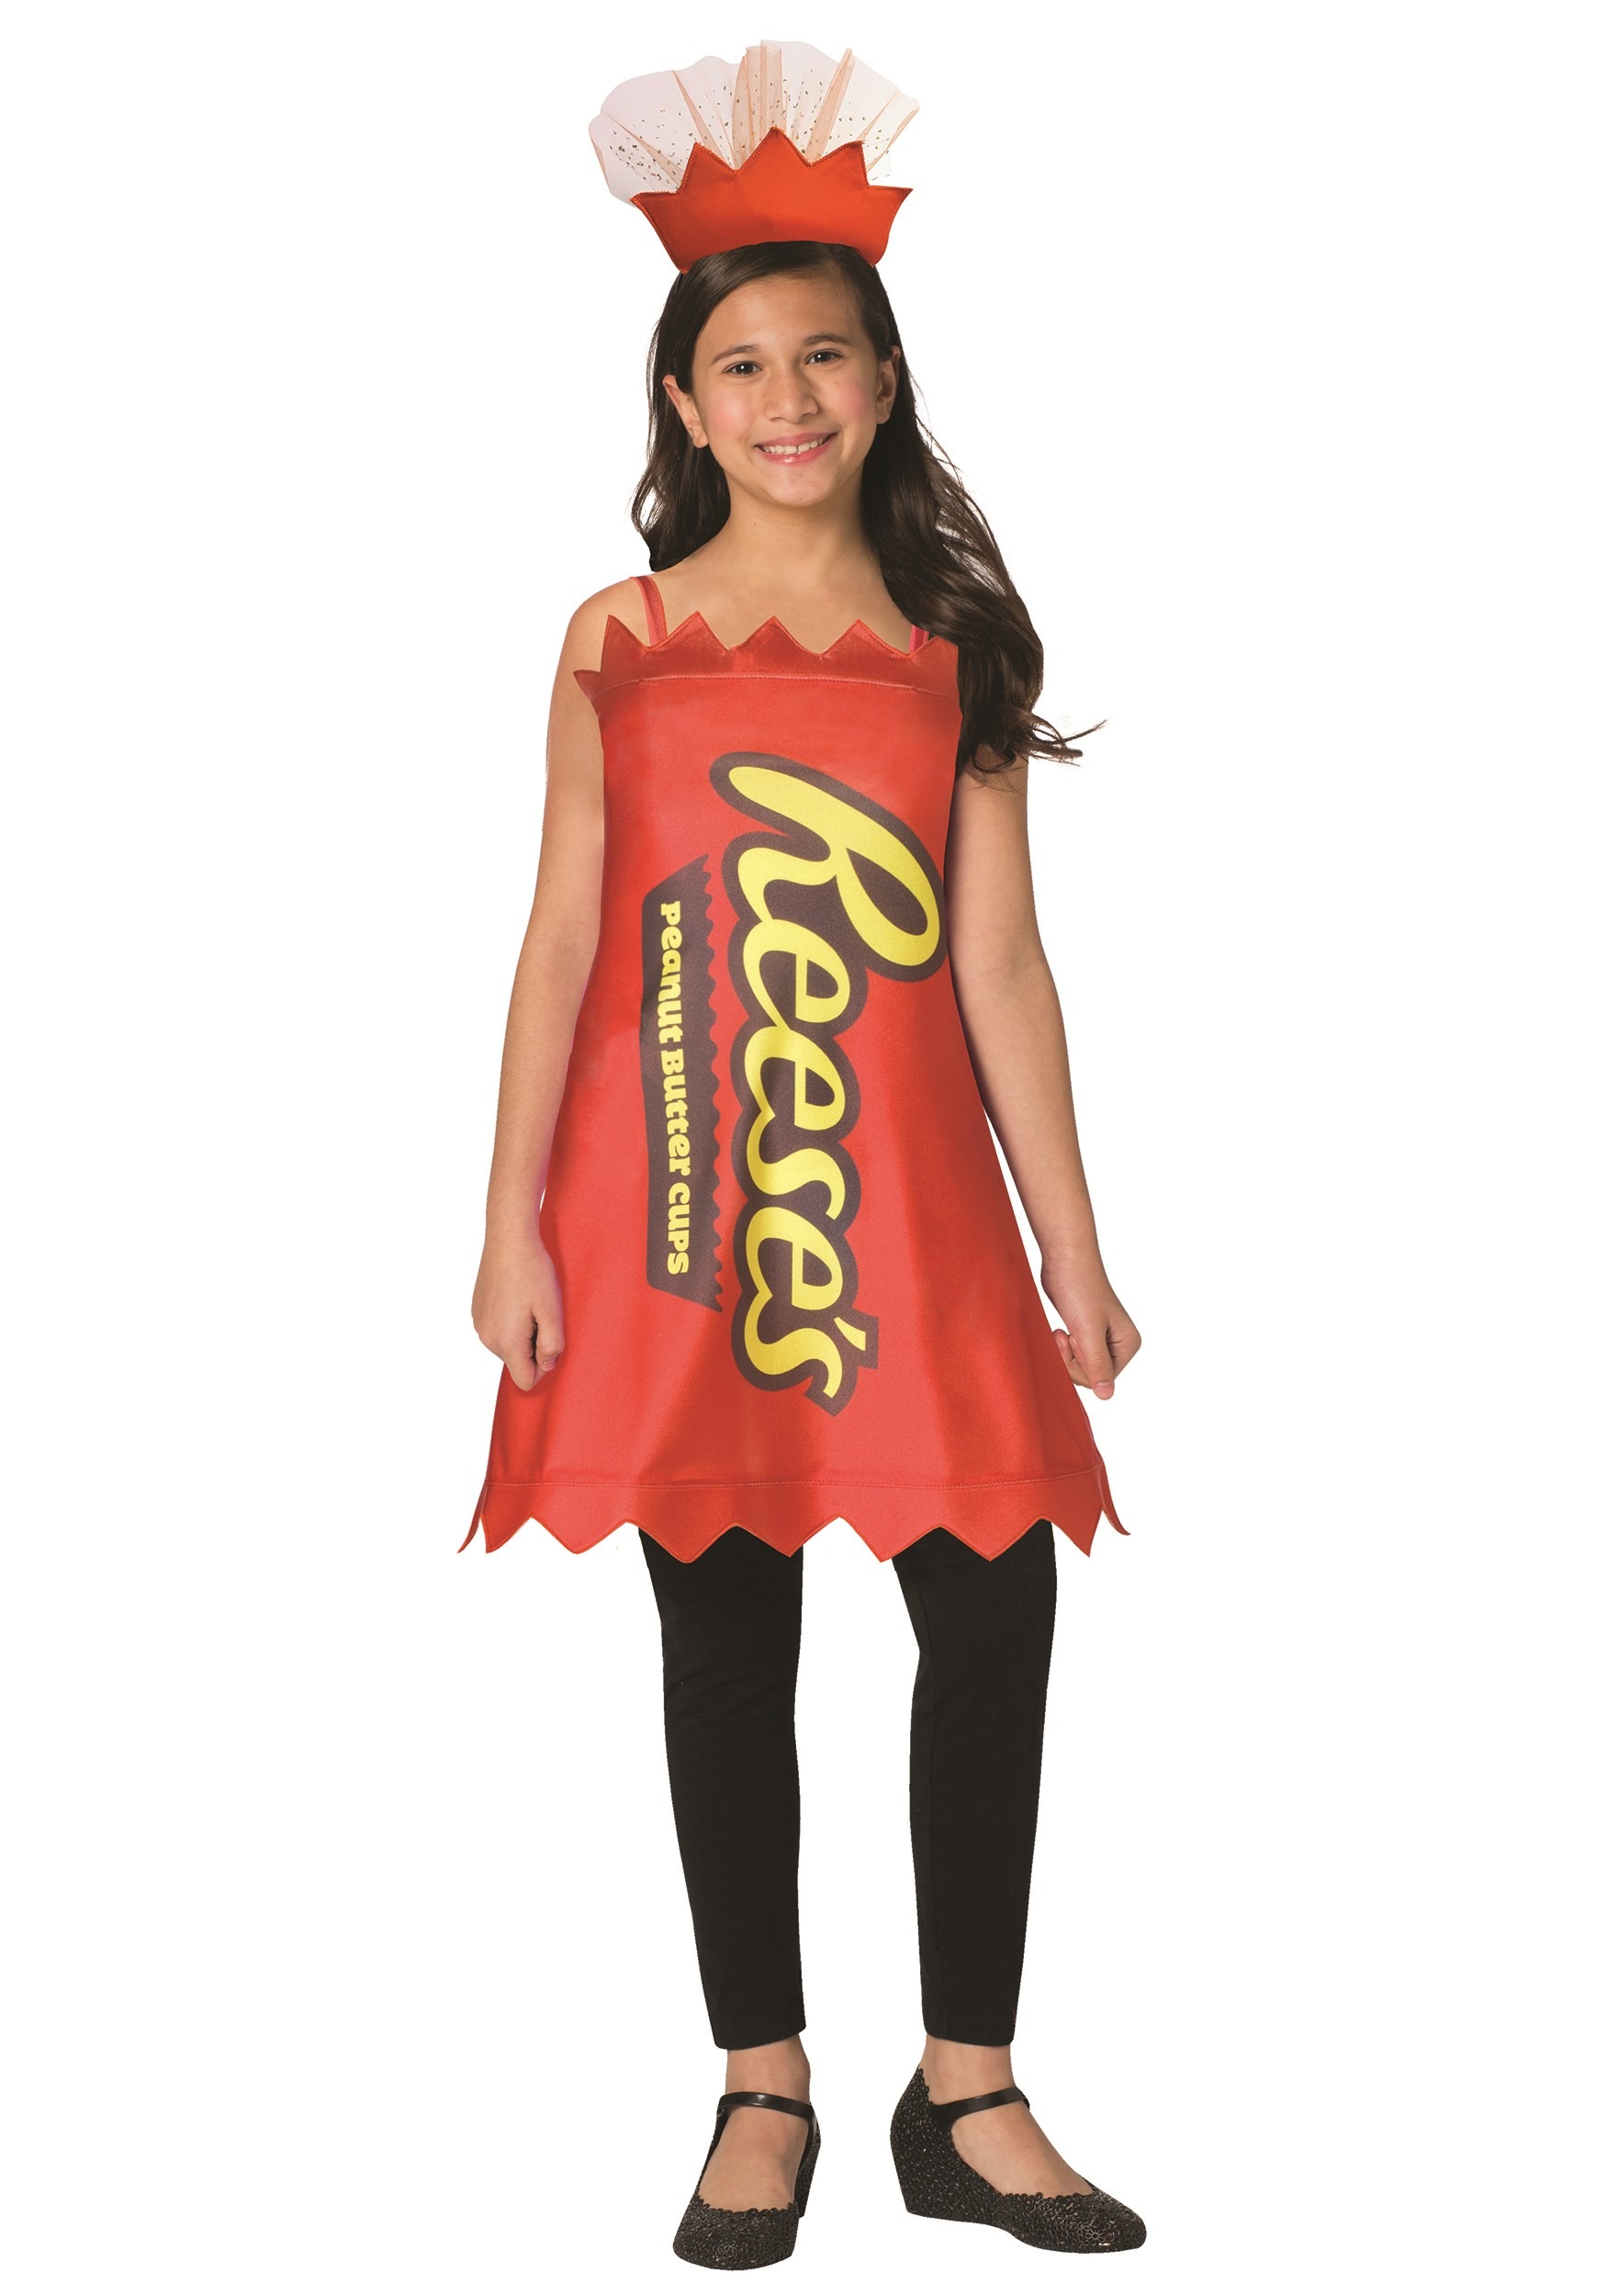 butter cup costume